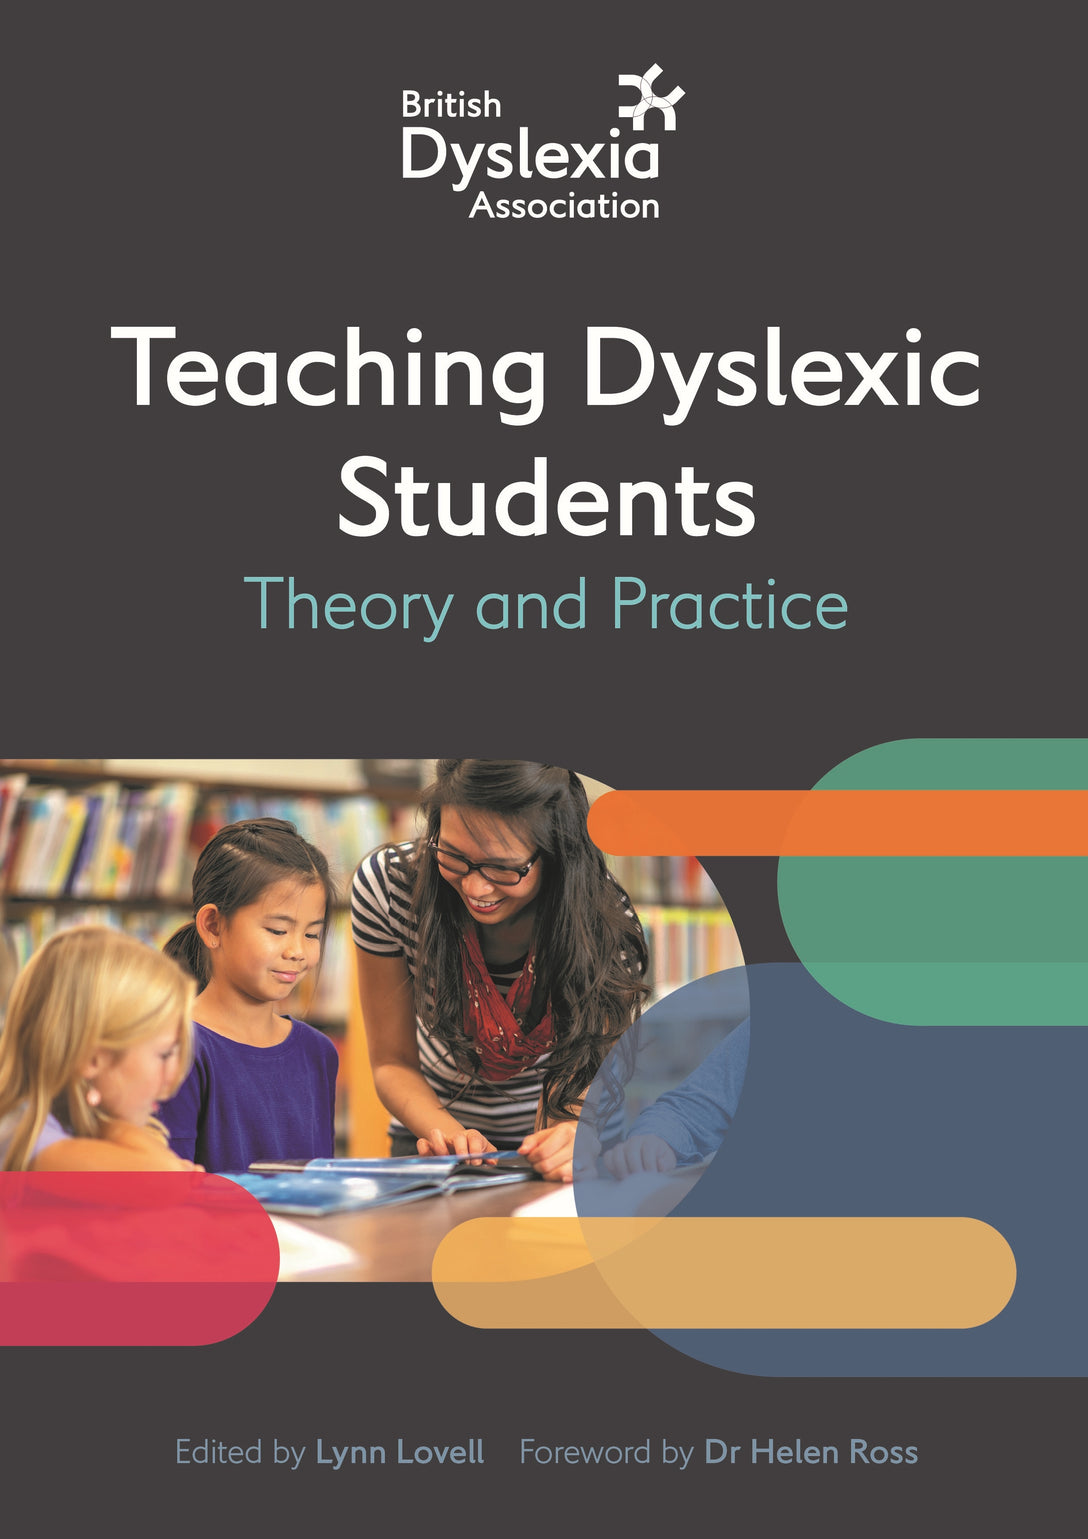 The British Dyslexia Association - Teaching Dyslexic Students by Helen Ross, No Author Listed